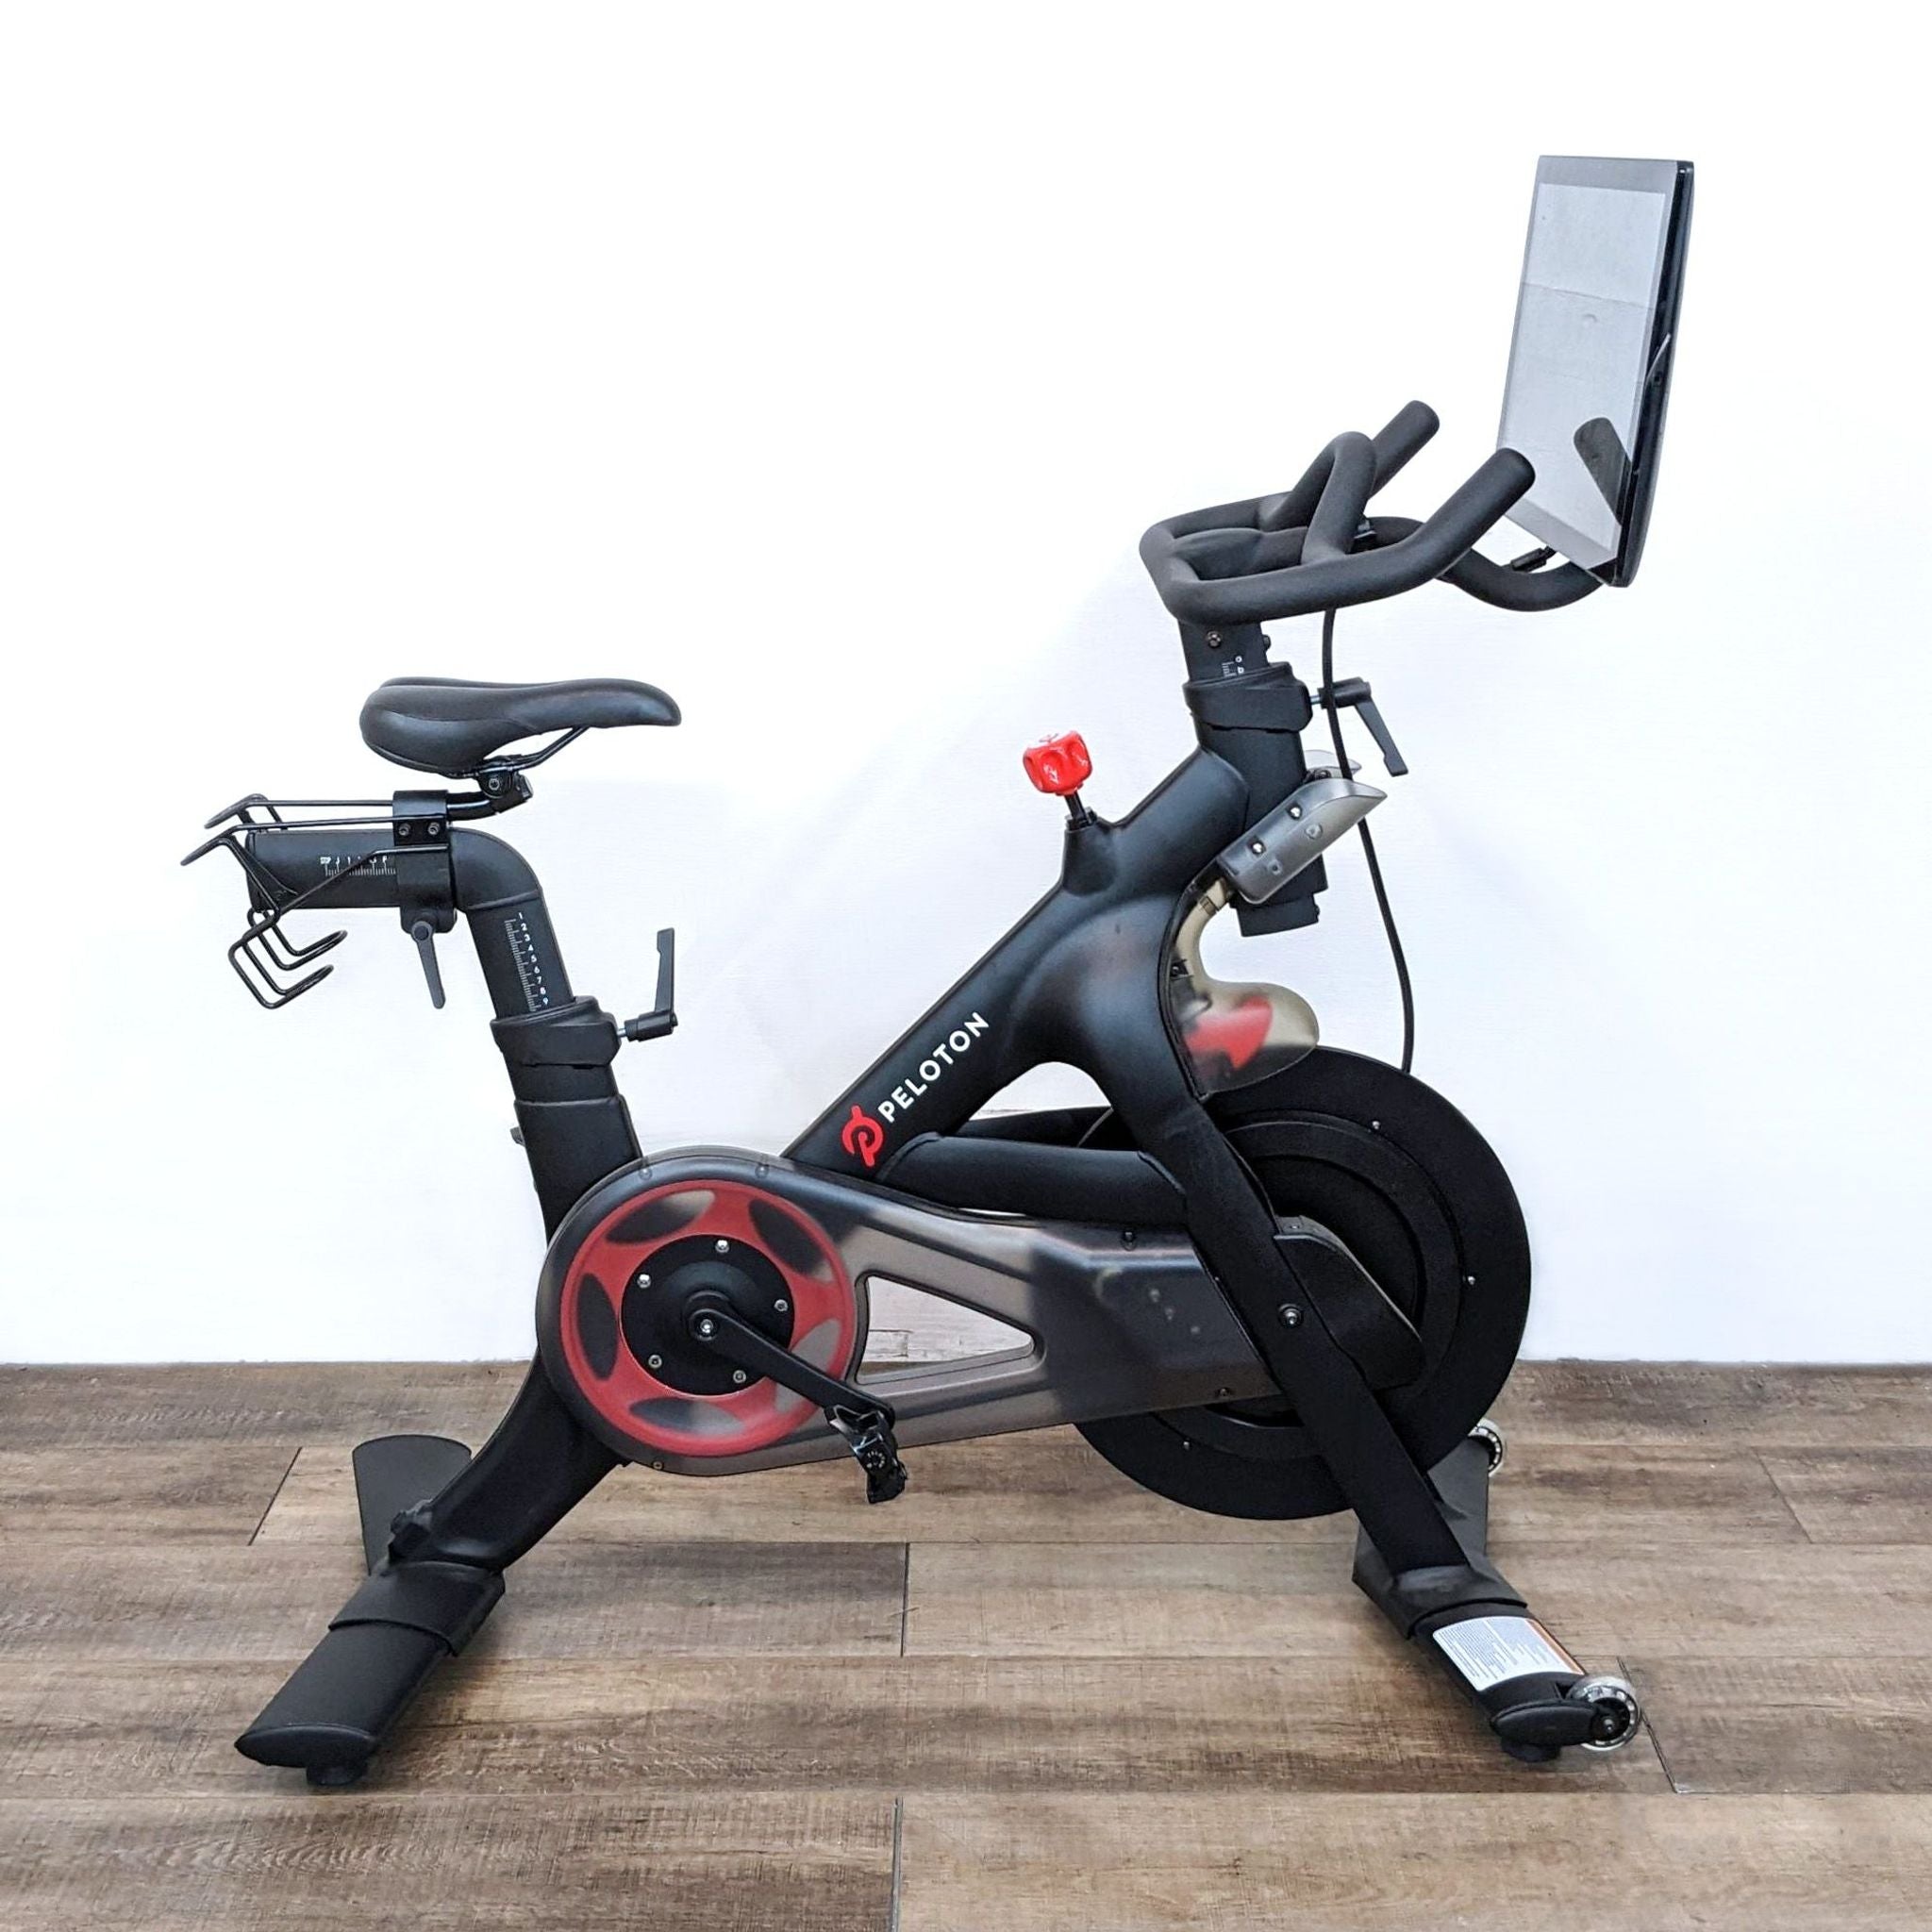 A Peloton exercise bike with a screen, set on a wooden floor against a white wall.